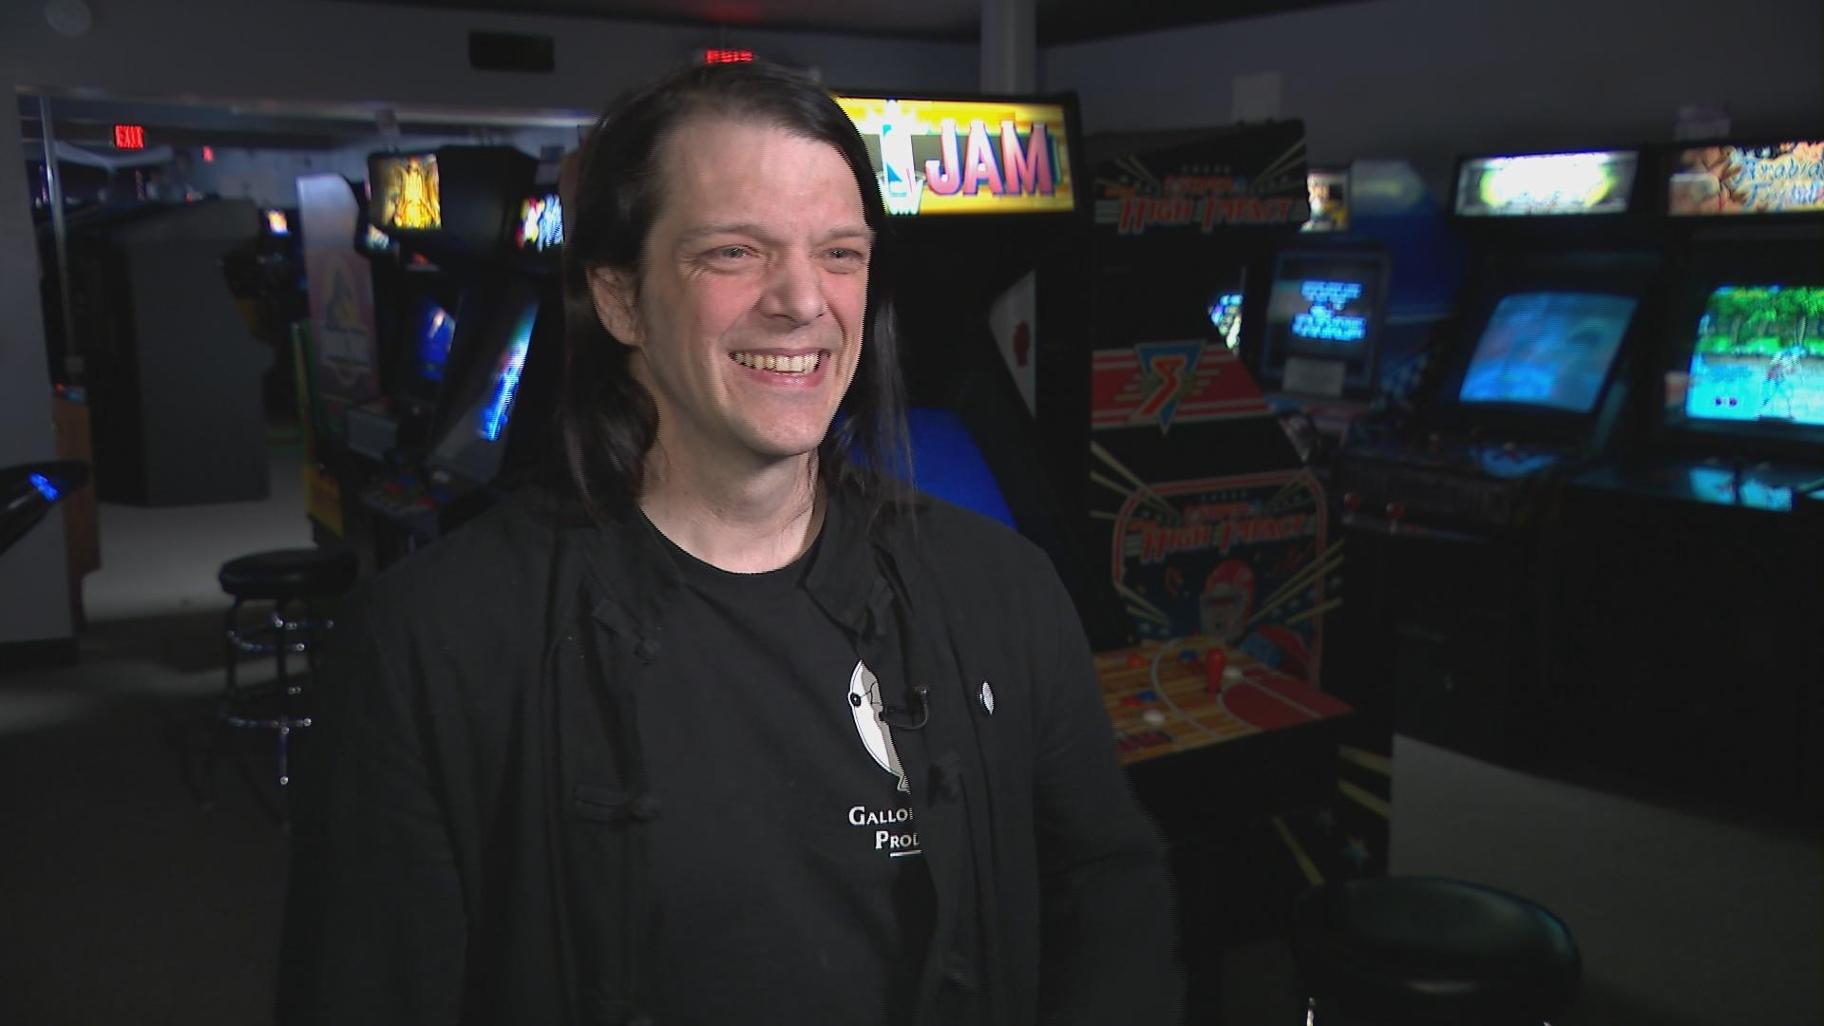 Doc Mack, Galloping Ghost’s owner, said his childhood memories of video games and arcades pressed the “start” button on his professional adventure. (WTTW News)